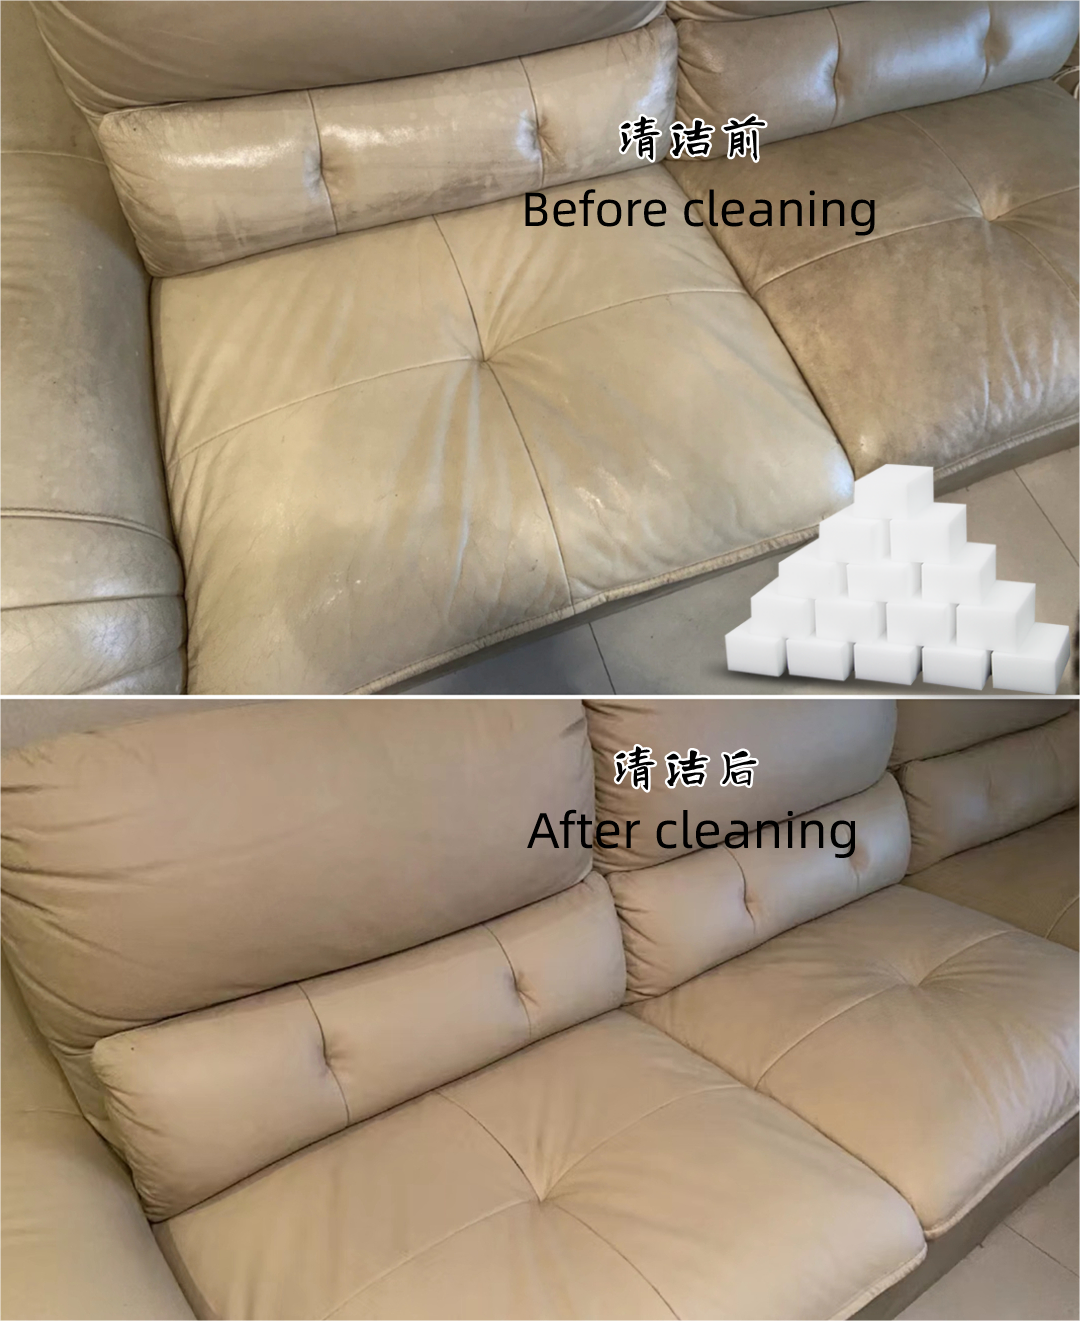 How to clean and maintain a leather sofa? Learn these methods and get twice the result with half the effort!